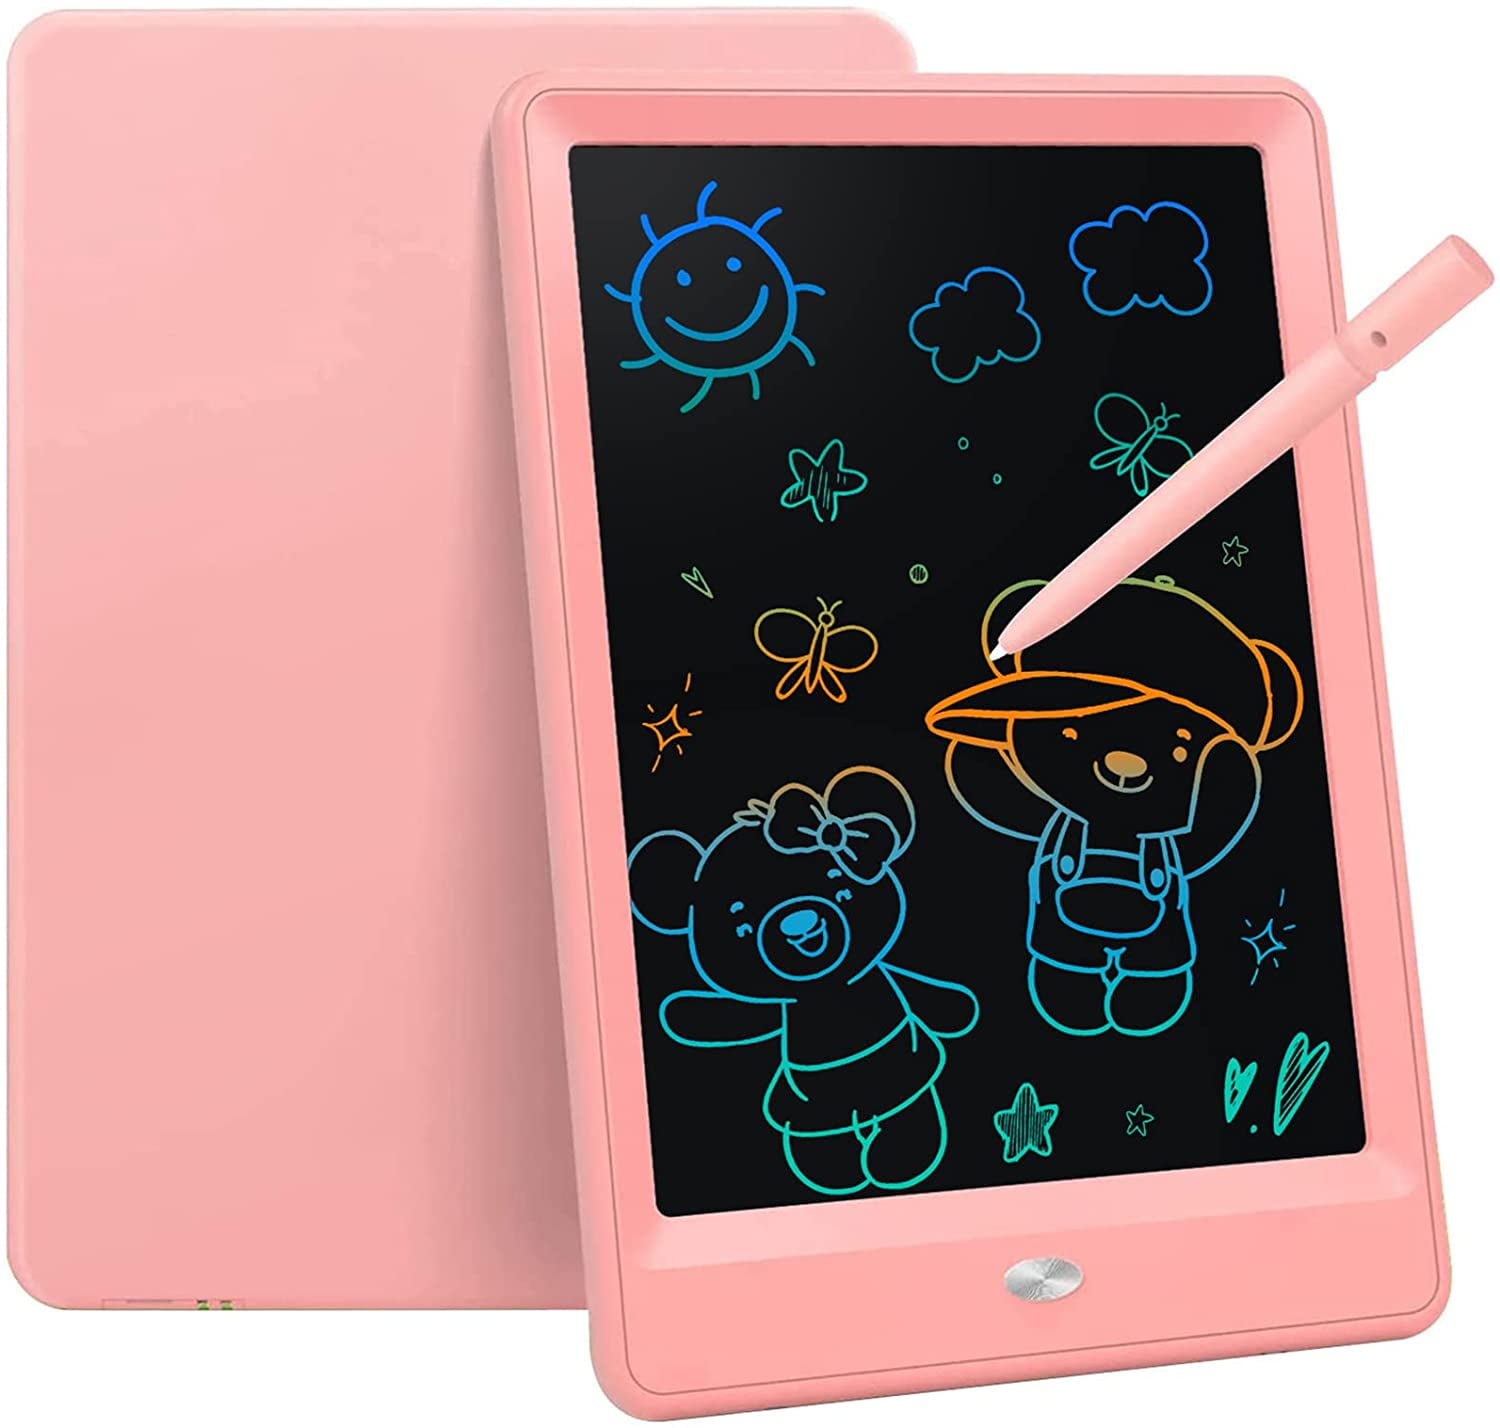 Kids Toys for 3 4 5 6 7 8 Year Old Boys Girls LCD Writing Tablet 10inch Coloring Toddler Drawing Pad Educational Doodle Board Electronic Drawing Board Travel Learning Toy Kid Birthday Gifts Age 3-5 